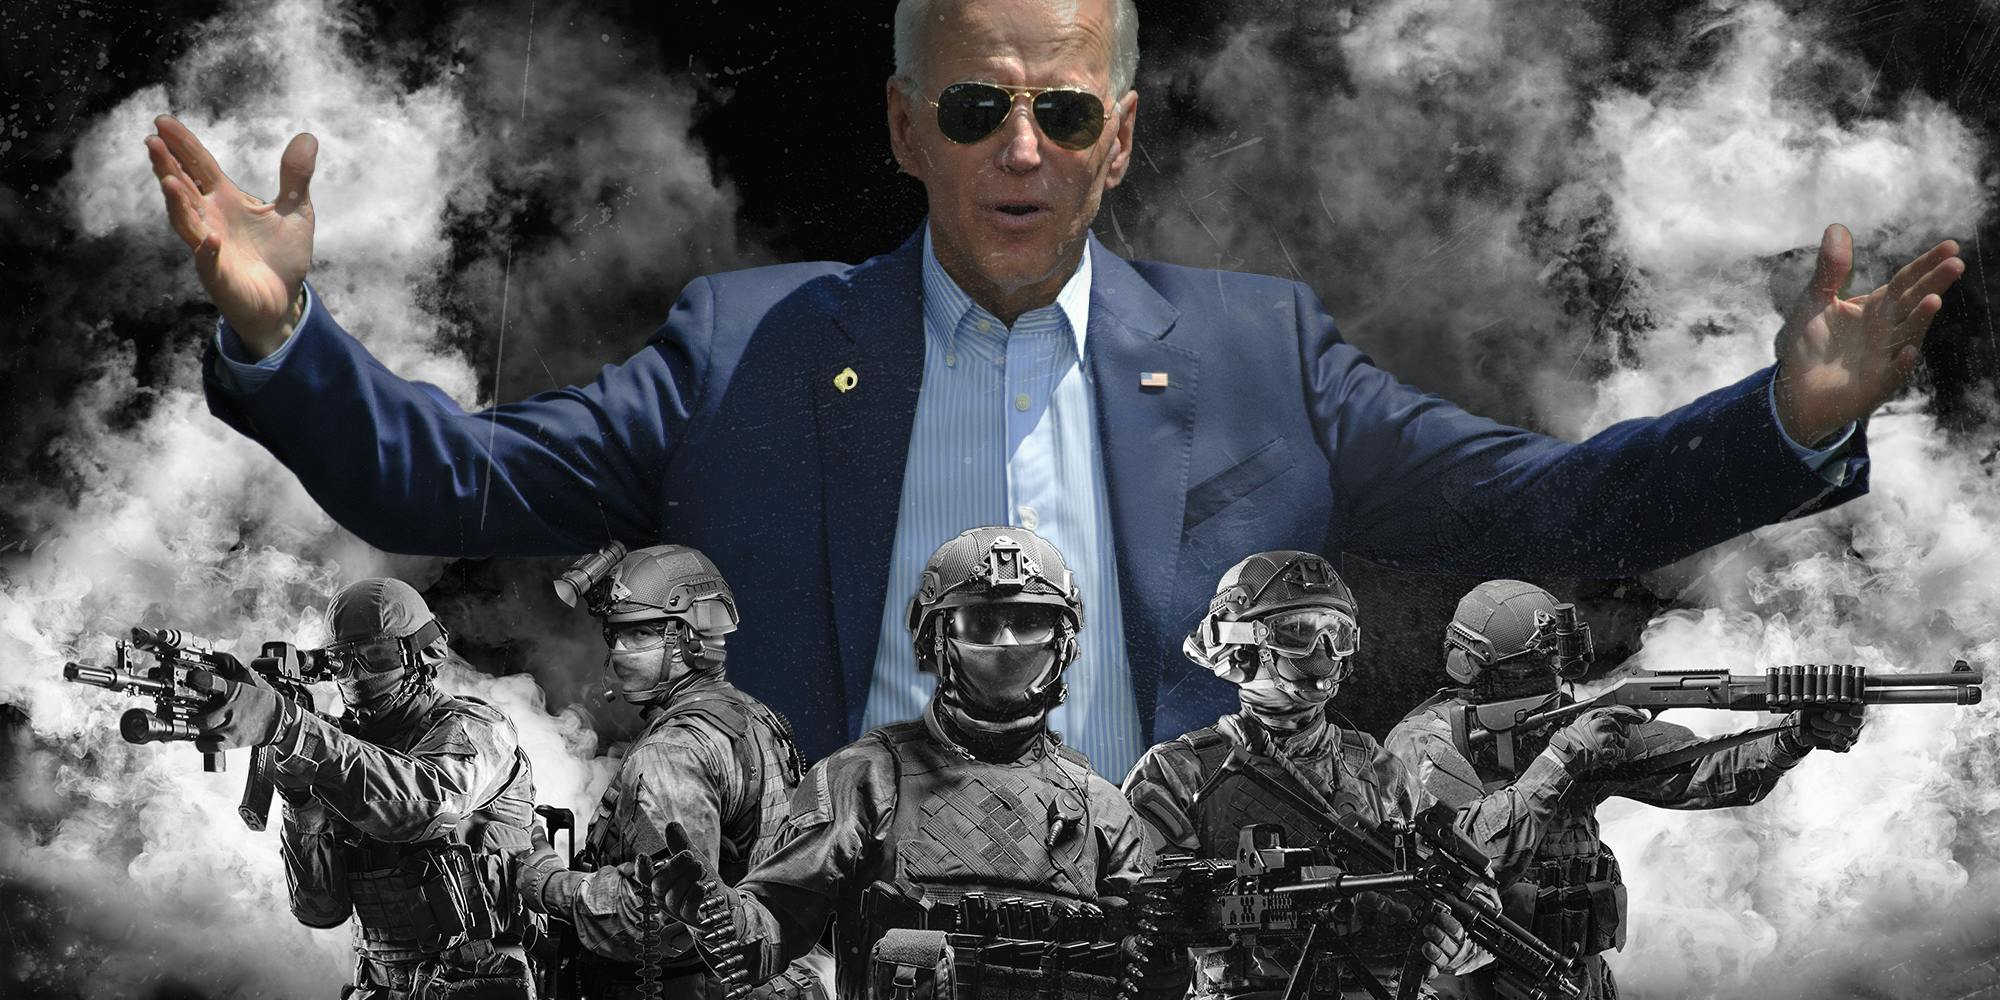 Immunity ruling gives Biden permission to send Seal Team Six after Trump, Libs say